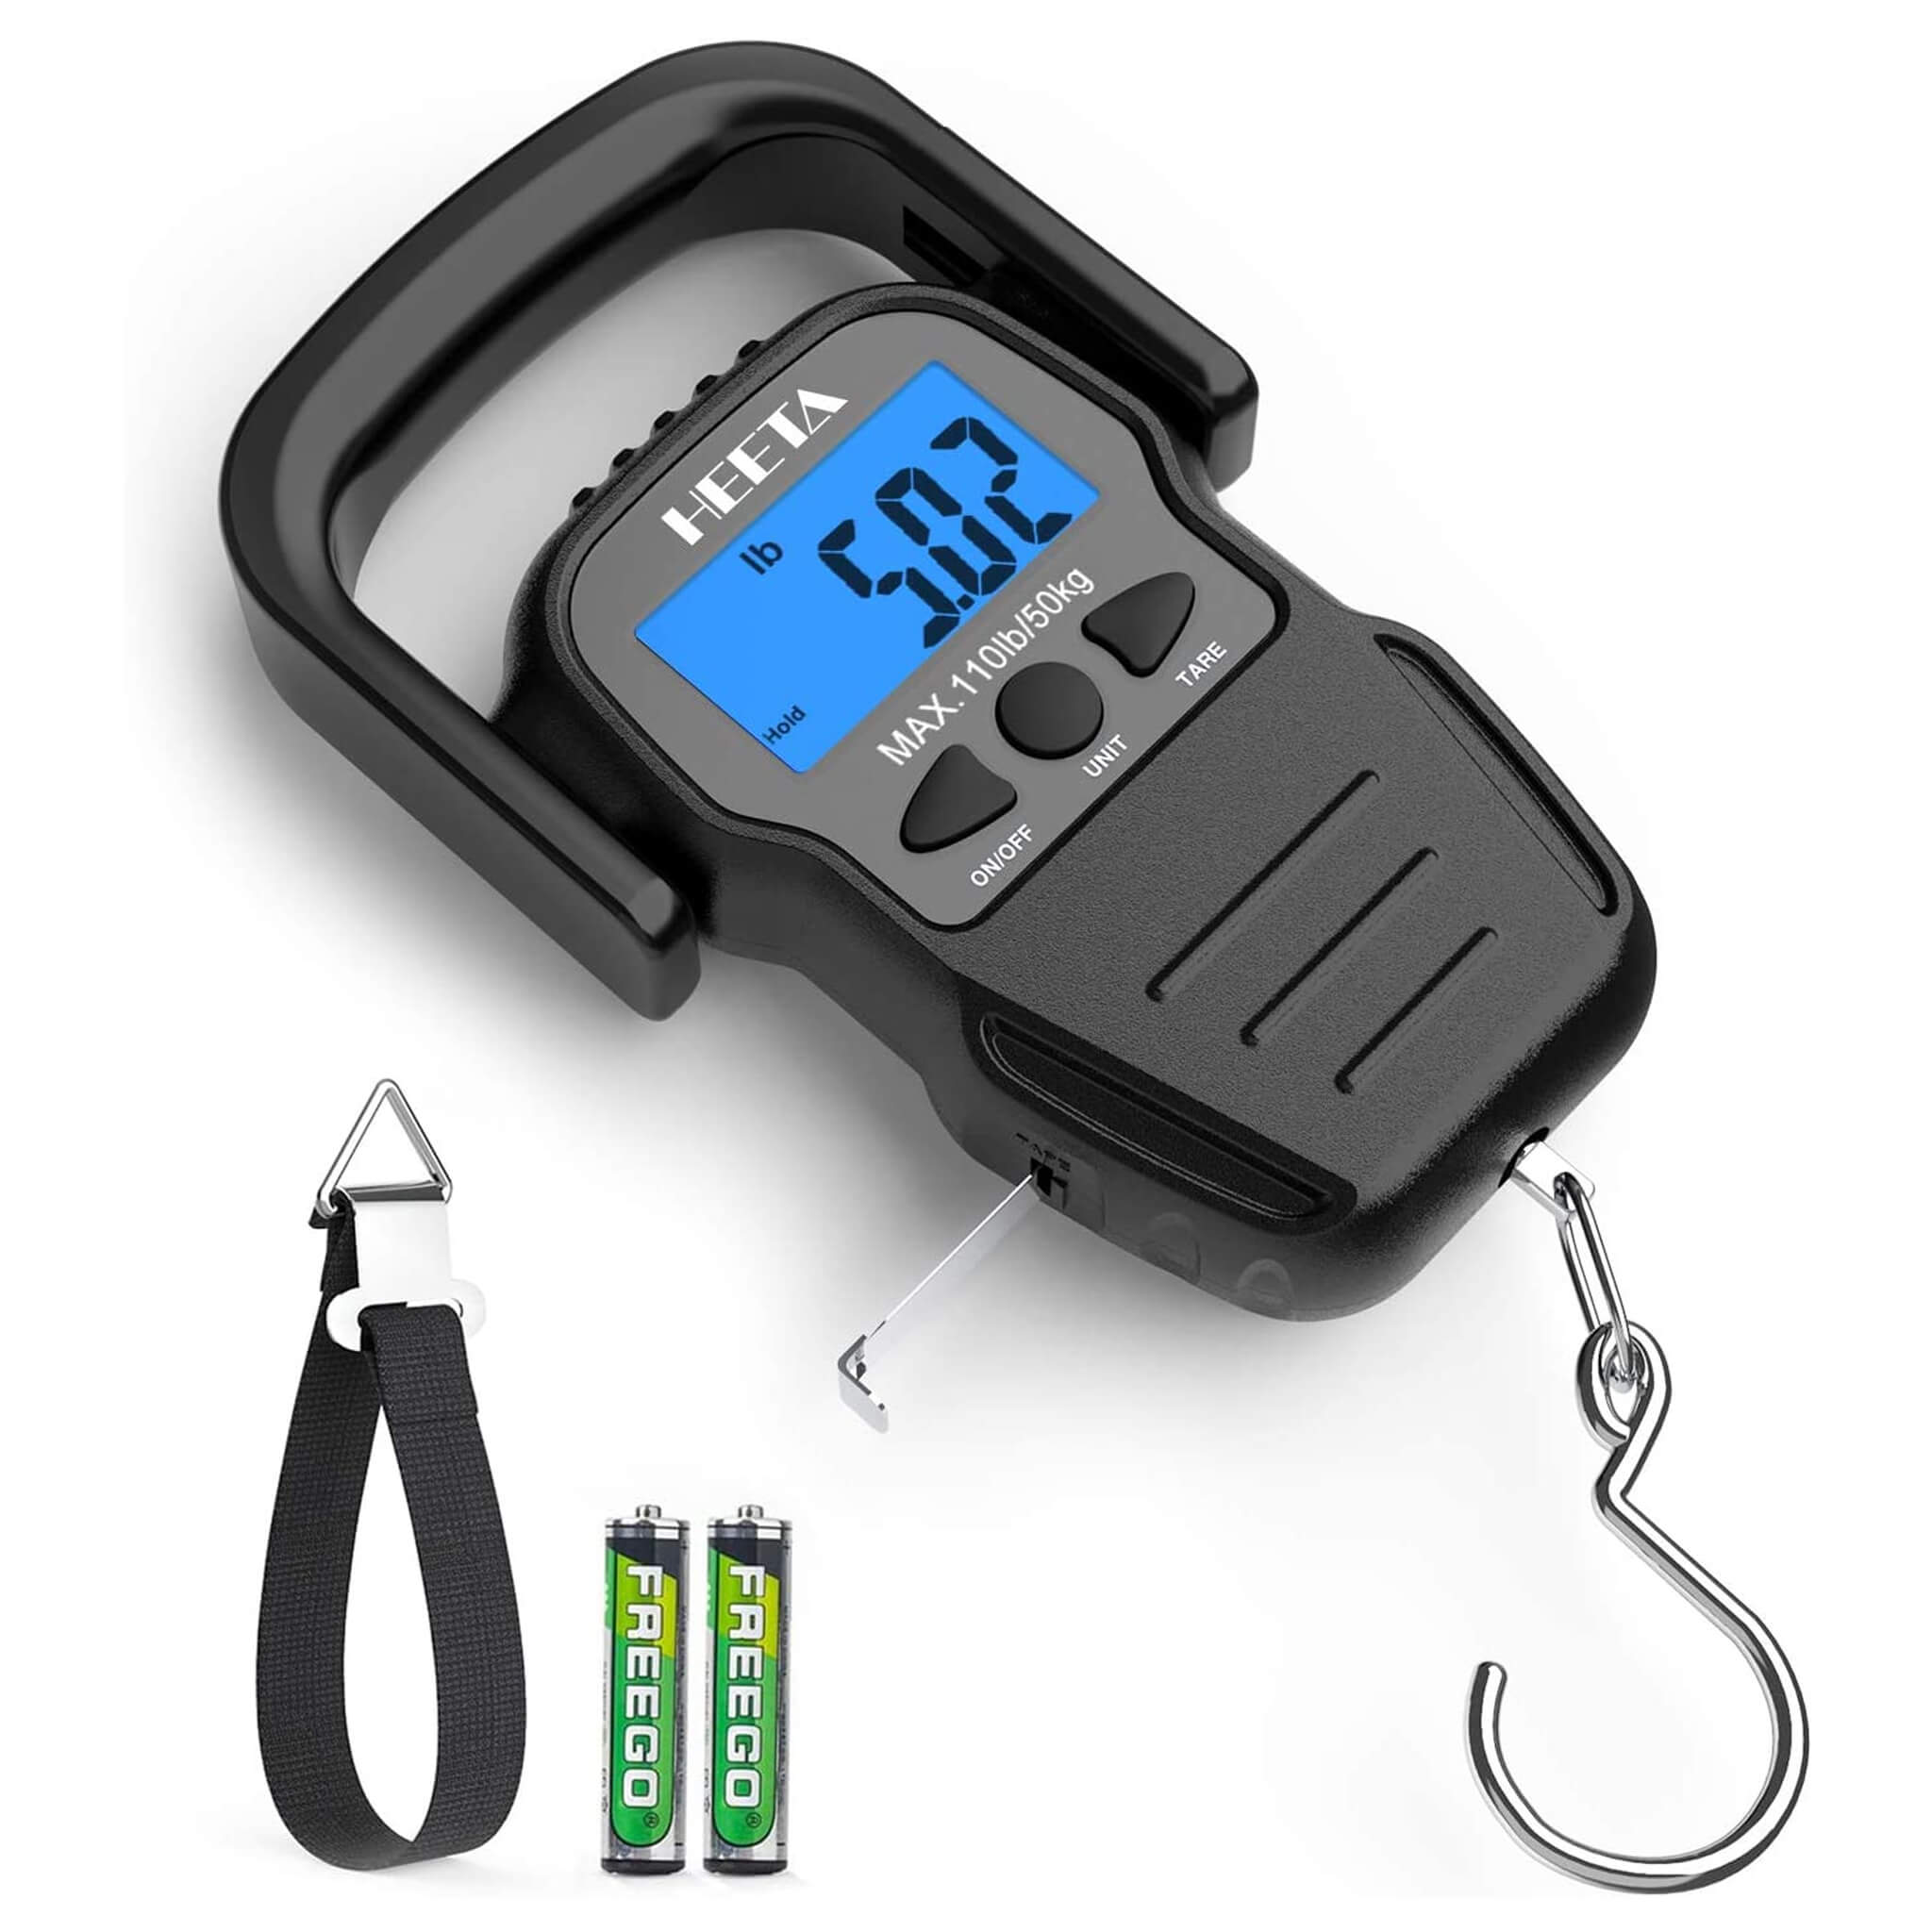 Digital Scale,Luggage Scale 50kg/110lb Portable Electronic LCD Digital  Travel Postal Fishing Hook Weight Scale with Tape Measure Hook and Backlit  LCD